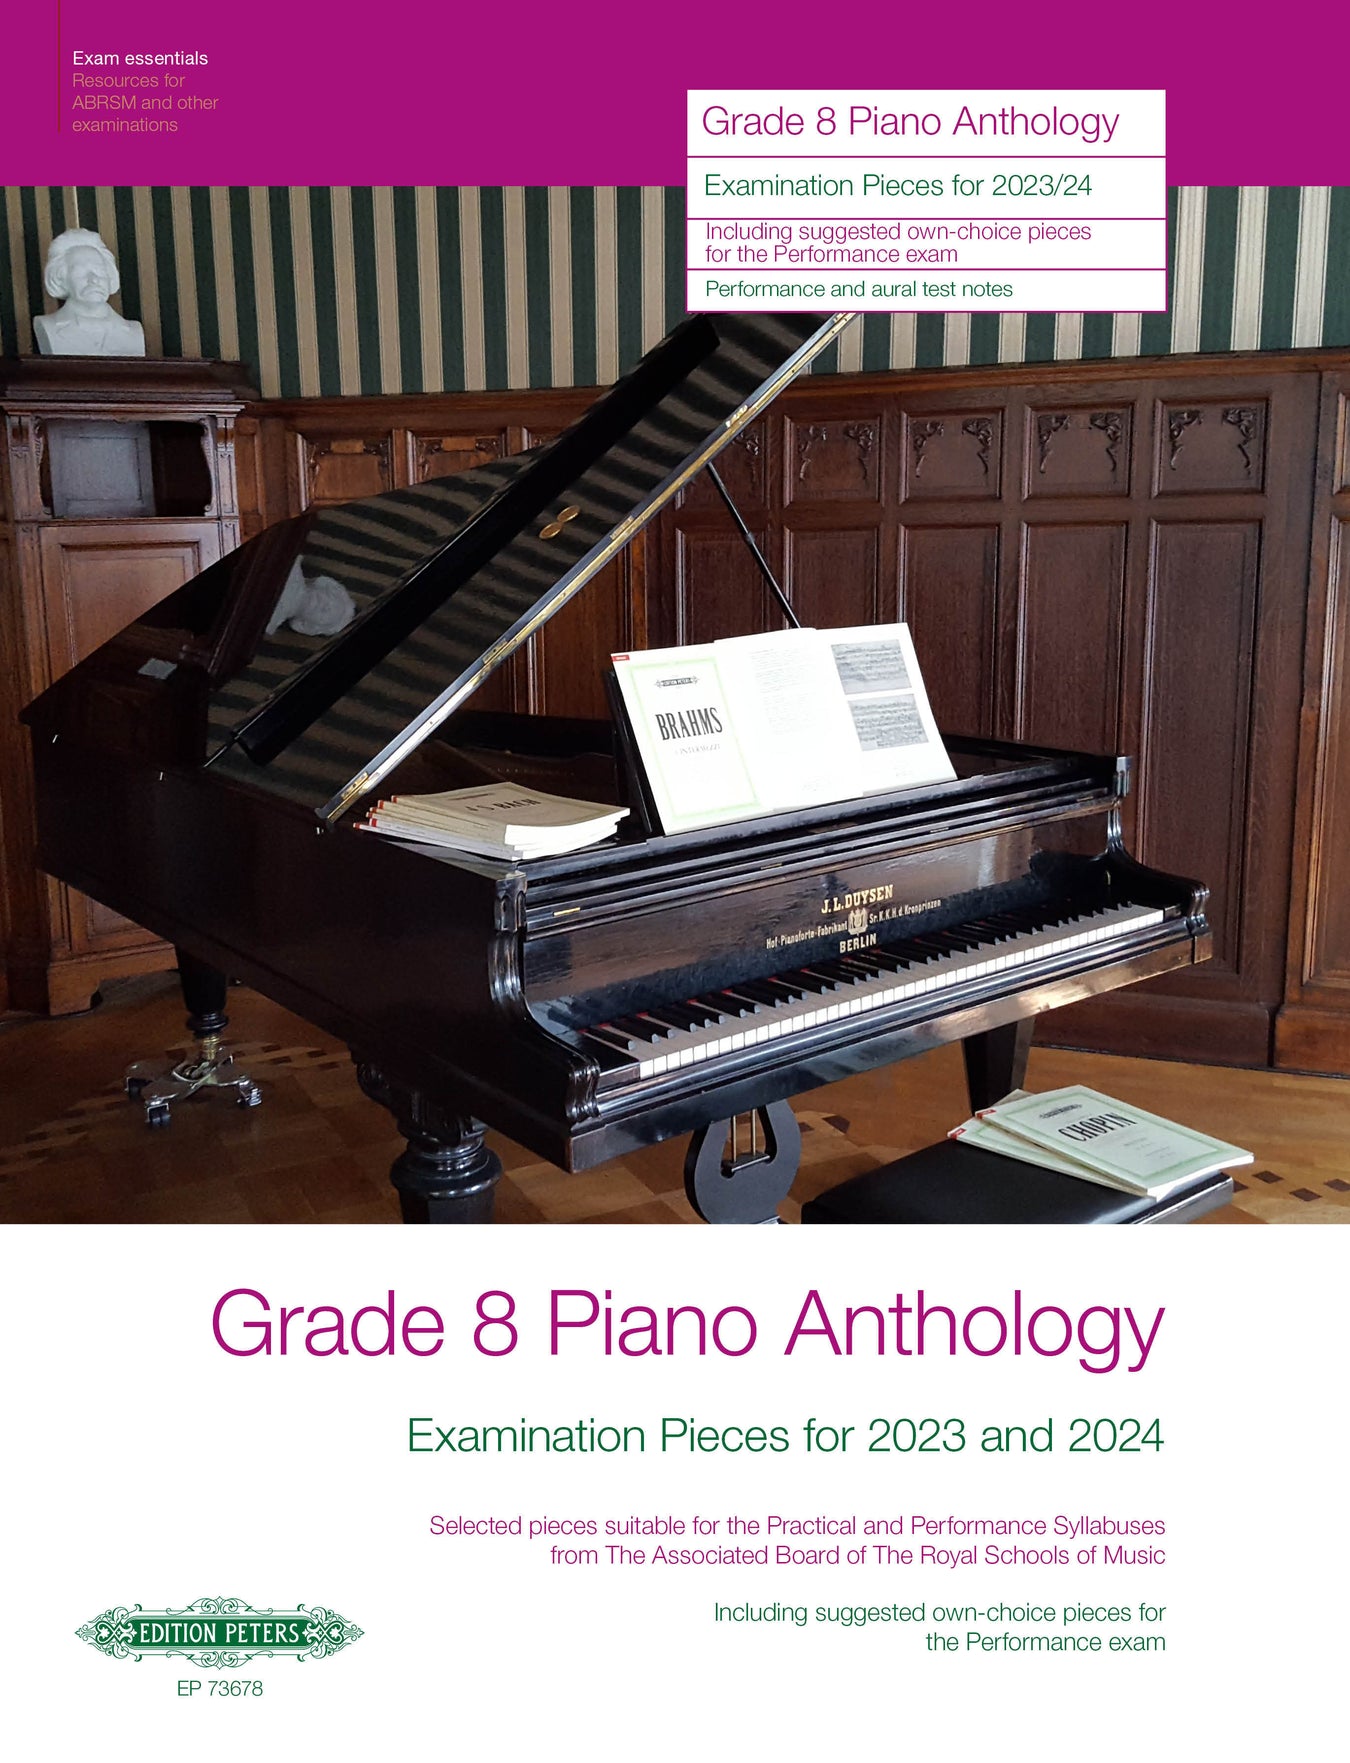 (Peters Edition) Piano Anthology Examination Pieces 2023-2024 Grade 5-8